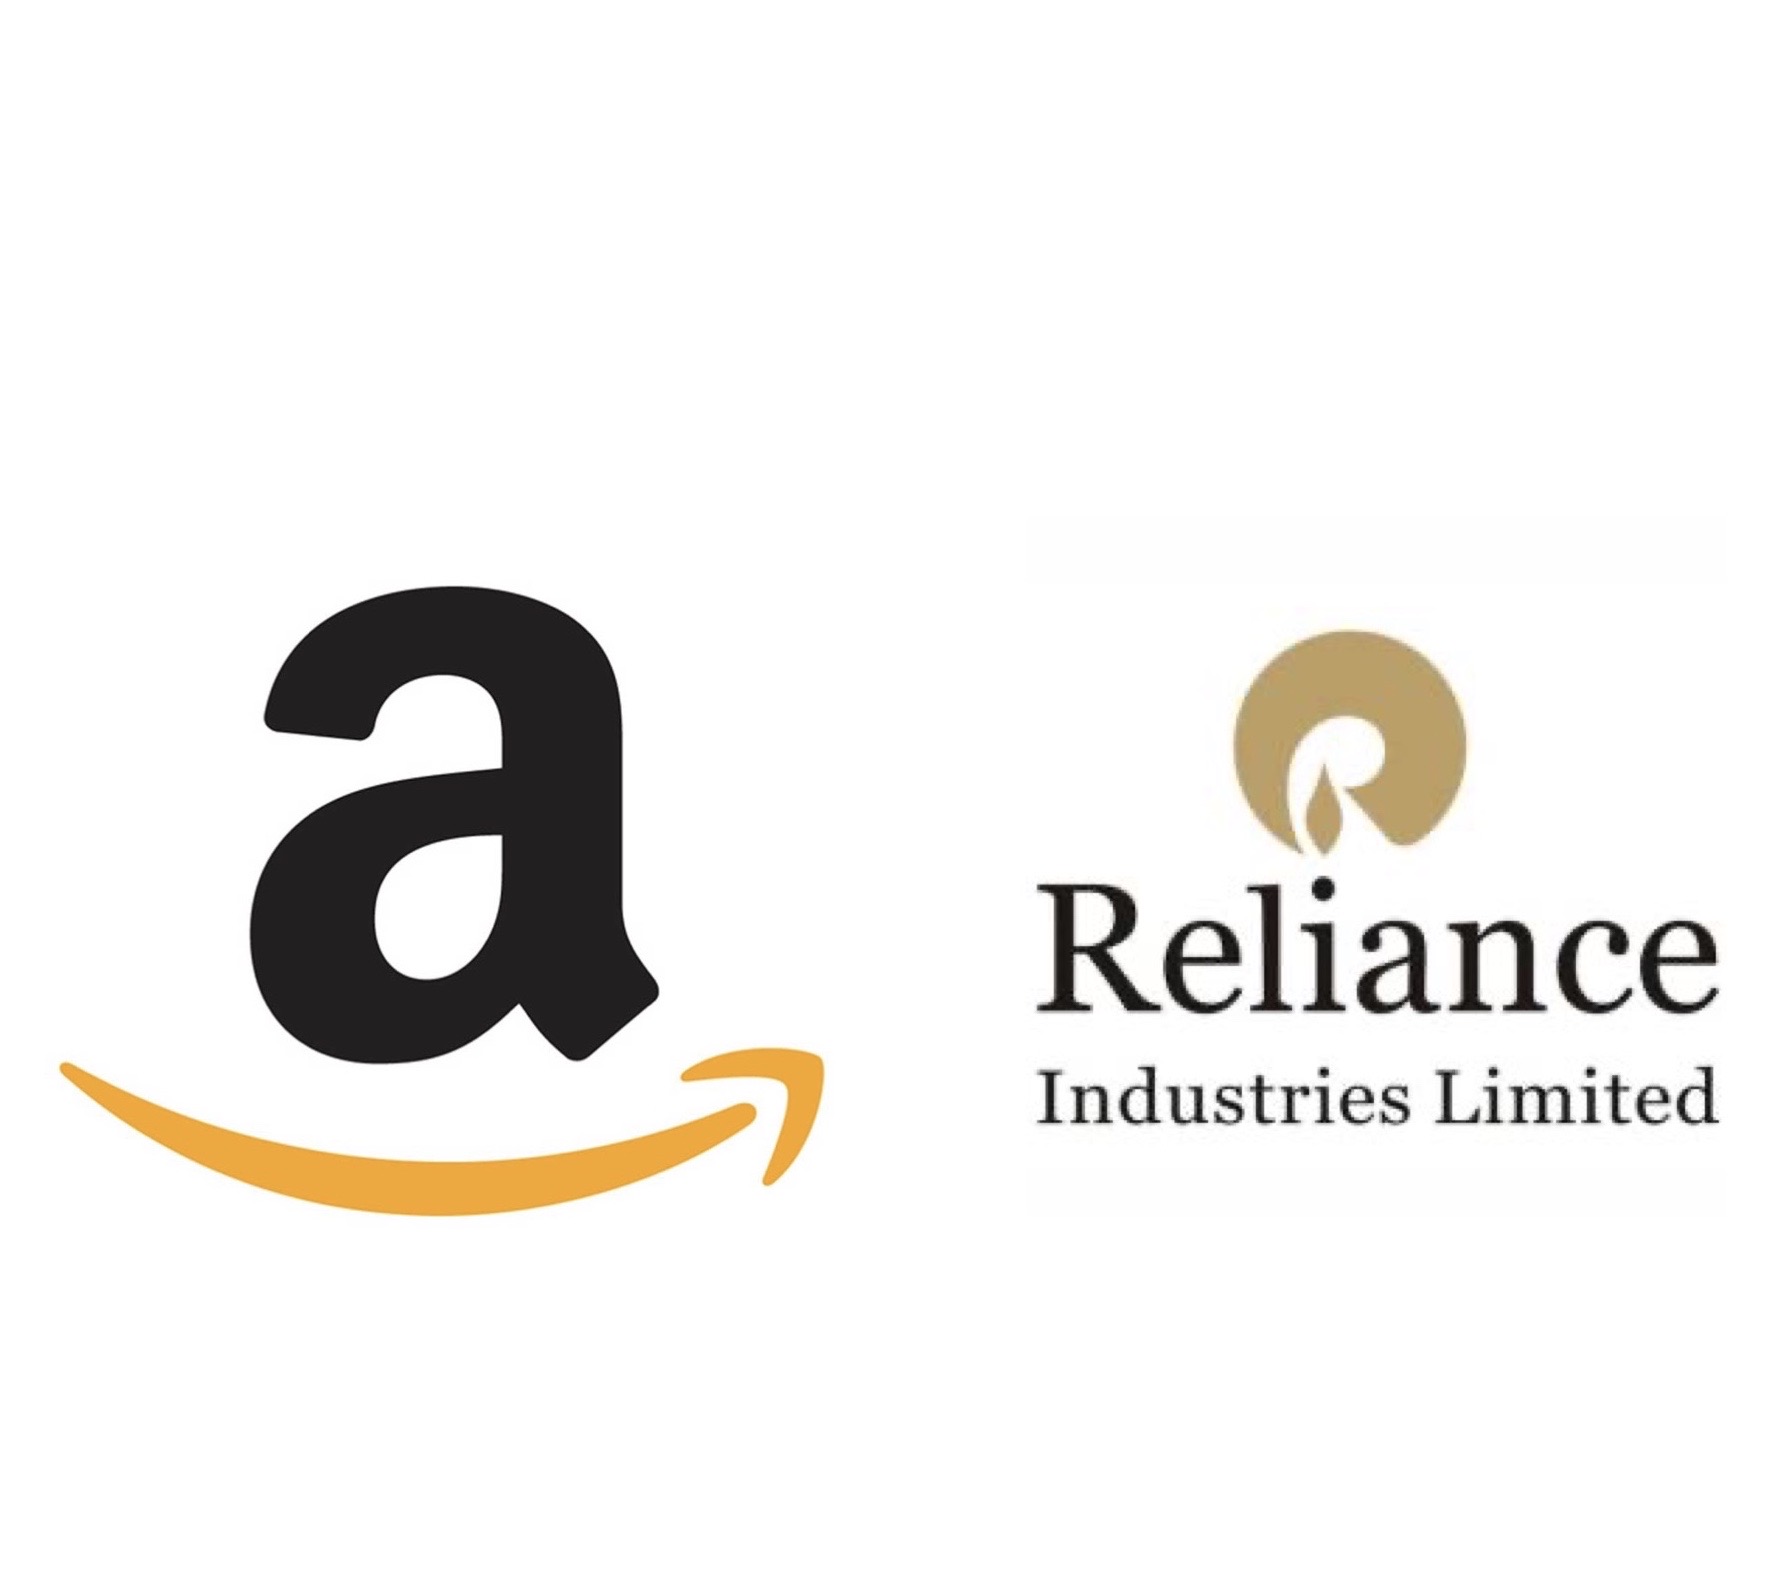 Amazon to buy $20 billion stake in India's Reliance Industries 